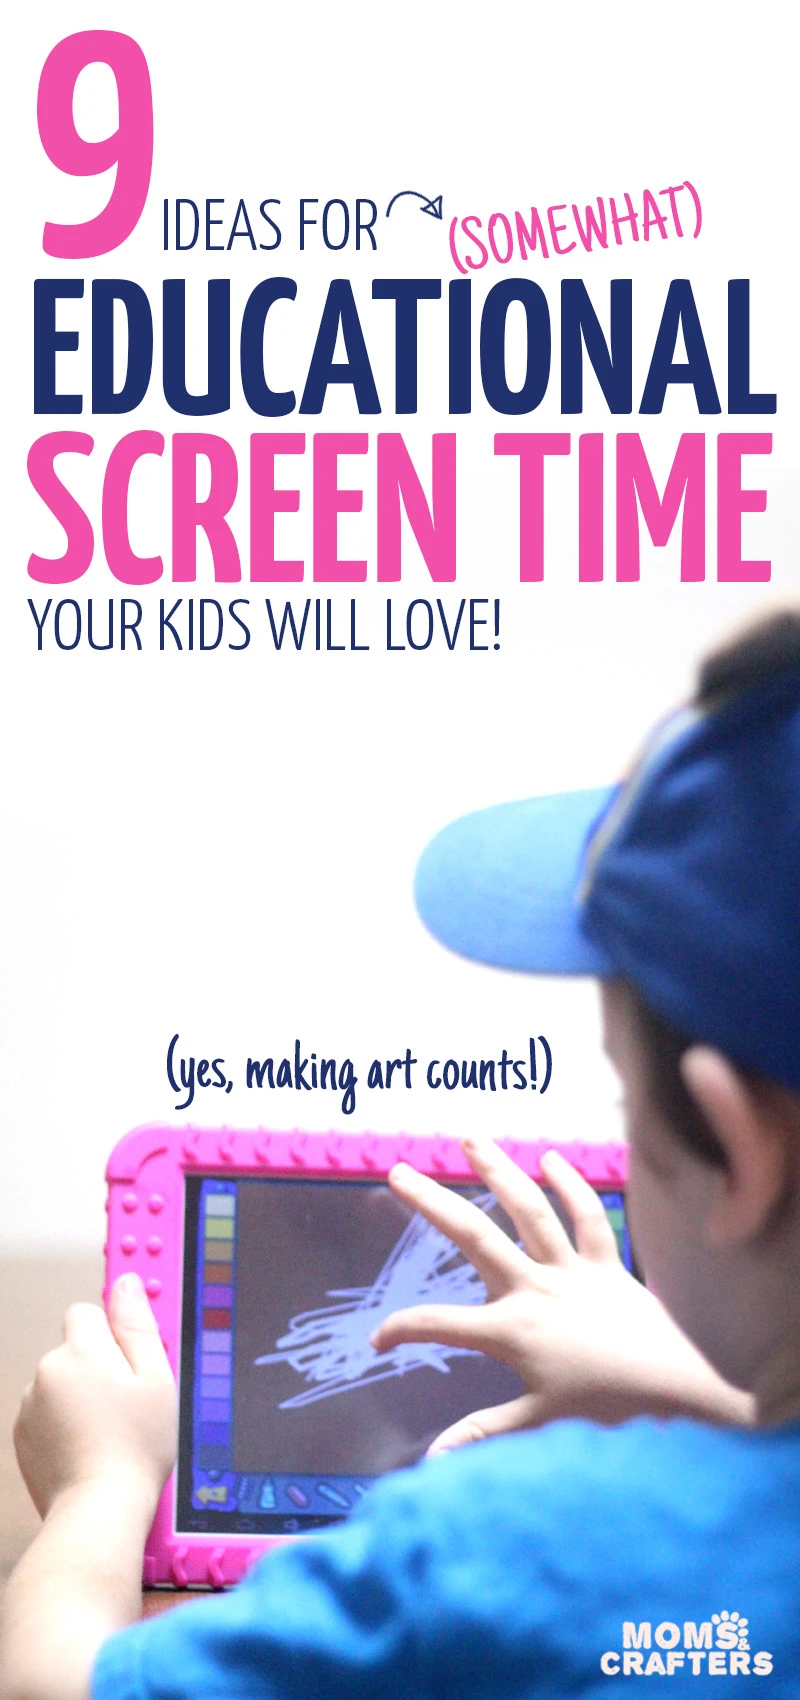 These practical ideas for educational screen time will make your kid want to learn! YEs, these are totally kid-approved for kids of all ages including preschool, kindergarten, all the way up to teens and tweens! They include learning apps, online courses and creative ideas - all of which will make great boredom busters while granting mom her sanity back :)